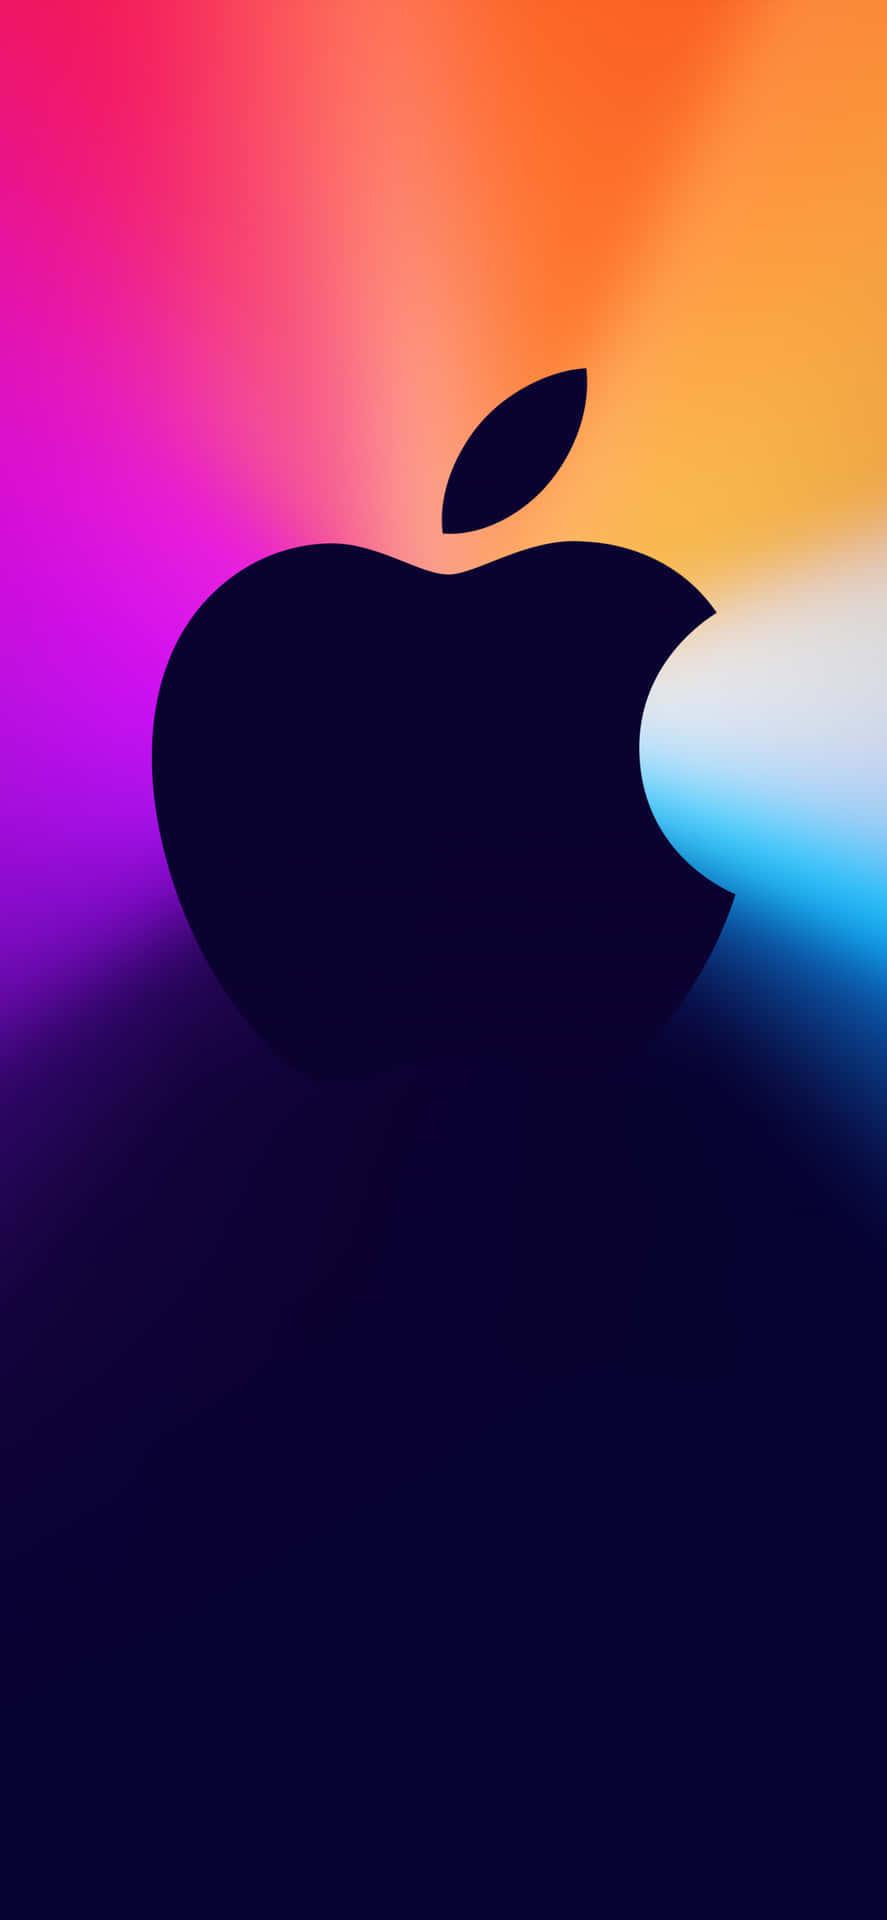 Download Illuminated Apple Logo on Iphone X Wallpaper | Wallpapers.com